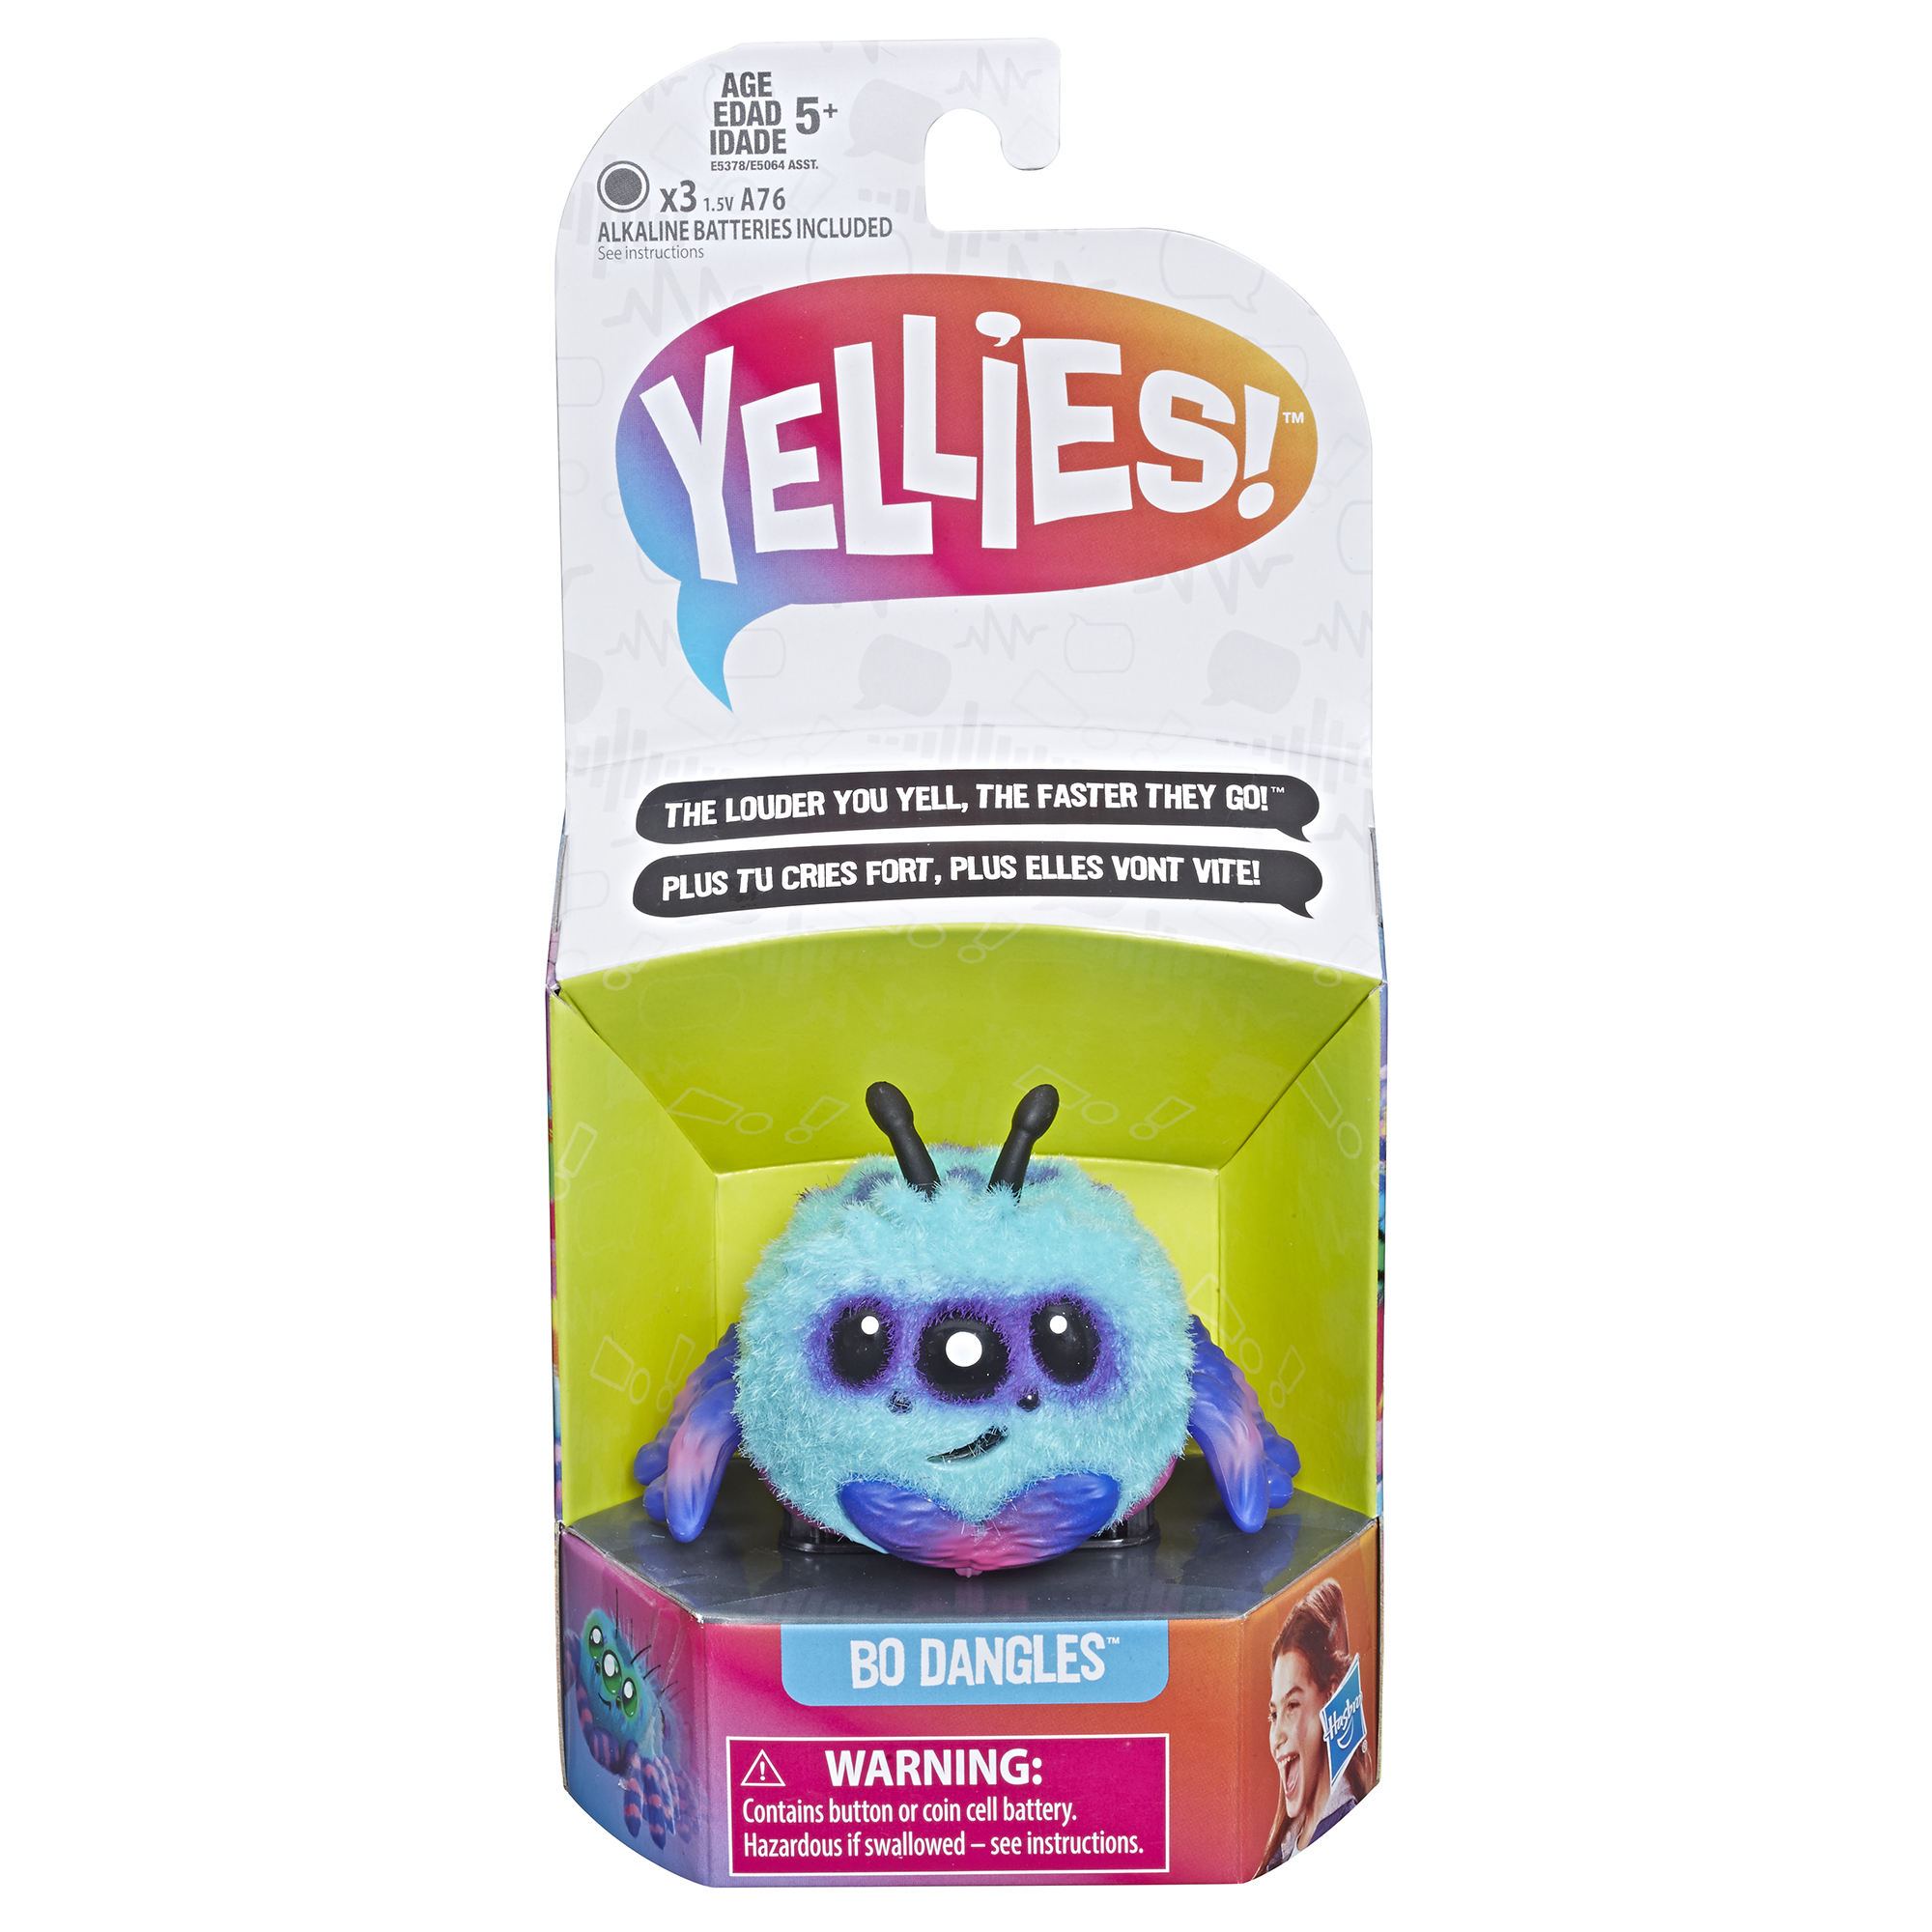 Yellies! Bo Dangles; Voice-Activated Spider Pet; Ages 5 and up - image 4 of 9